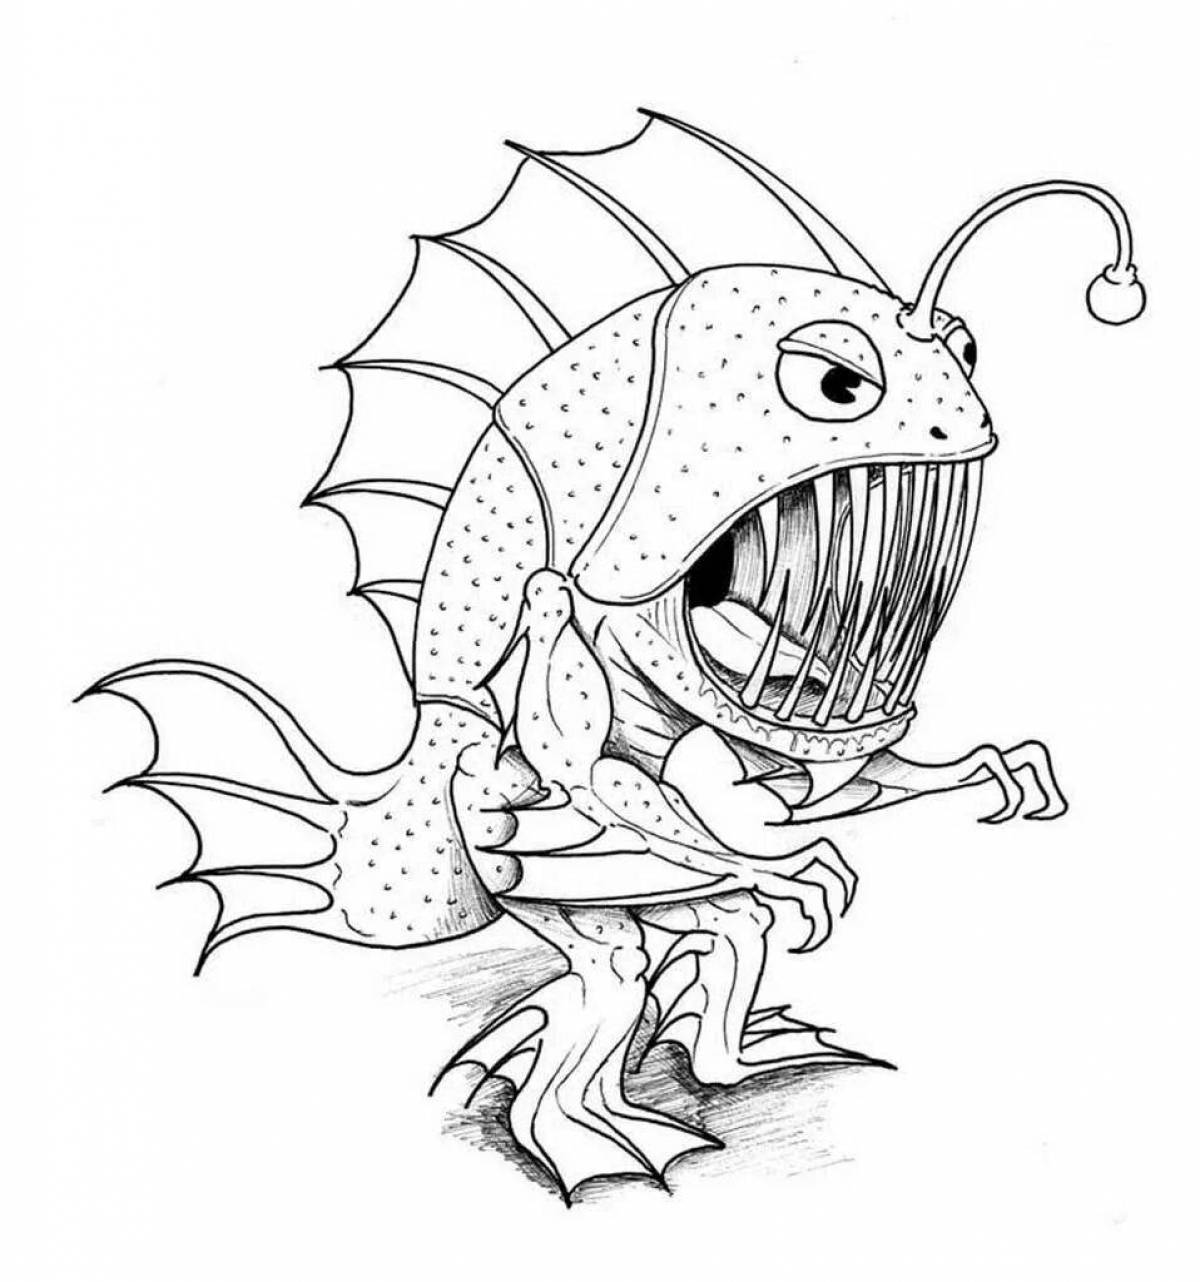 Coloring page bizarre one-eyed monster